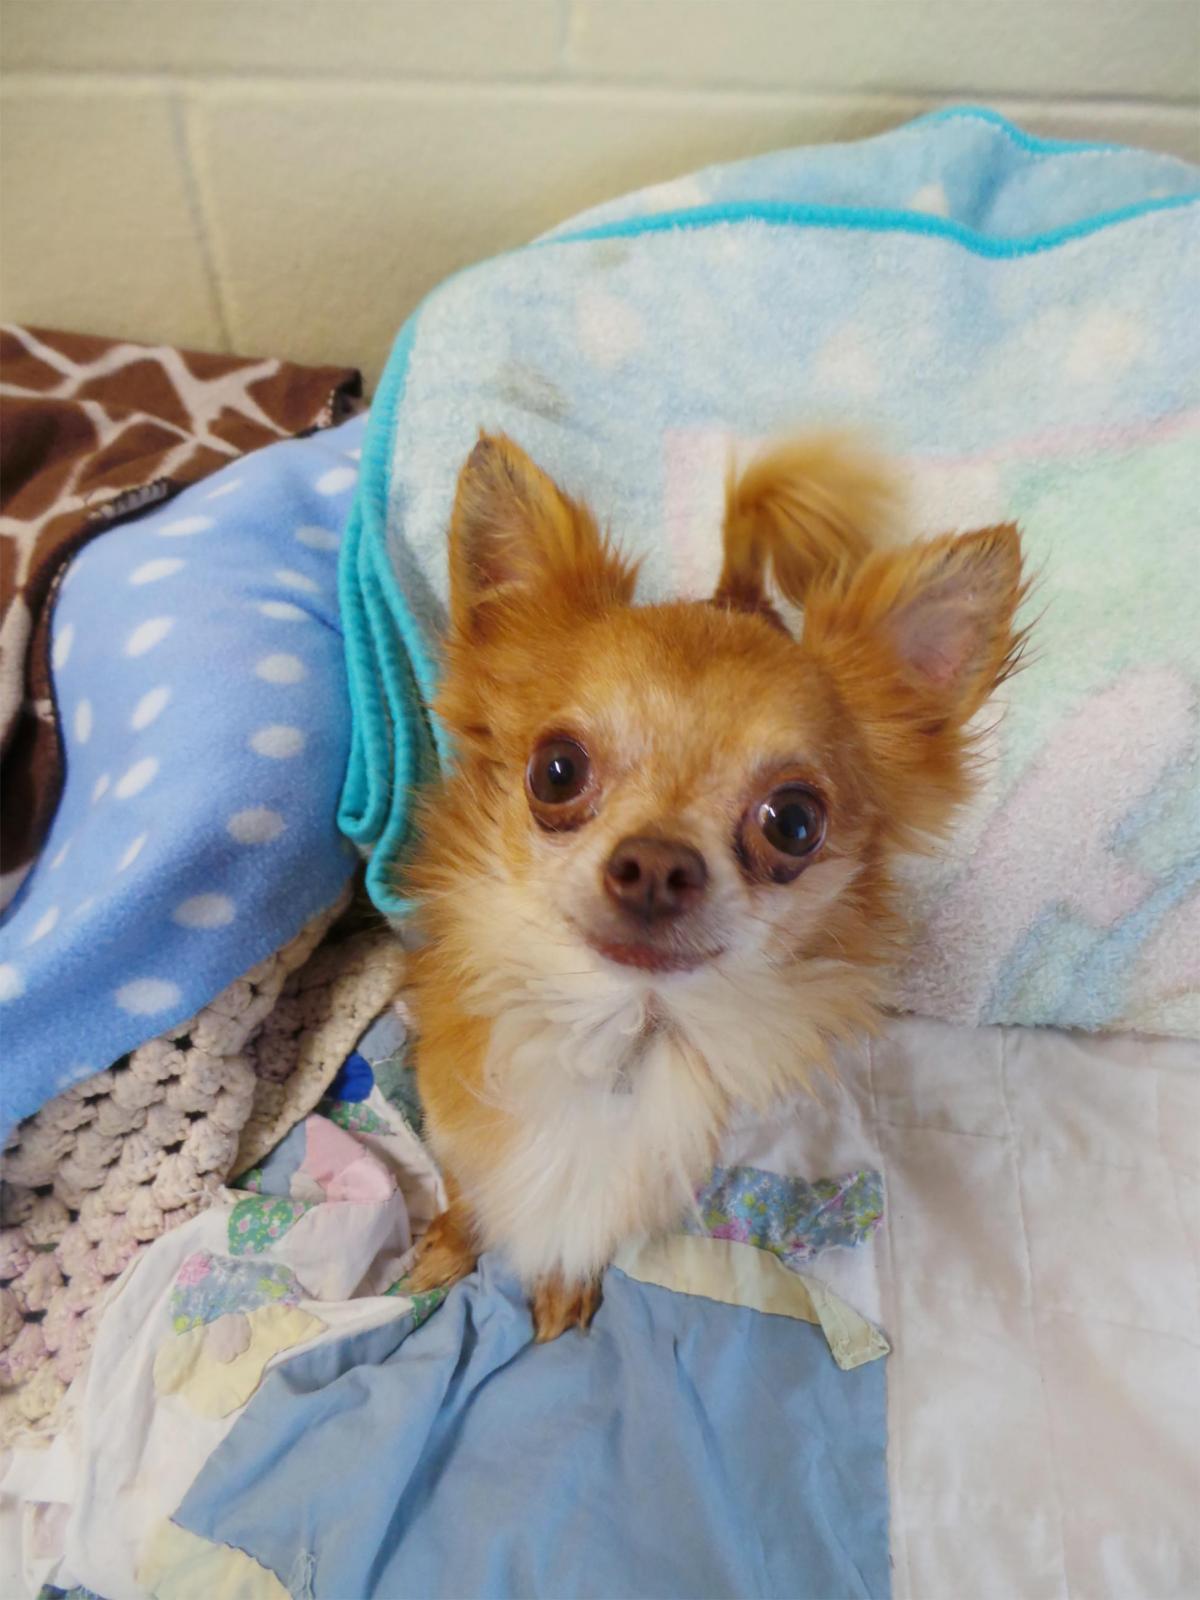 20/03/15 Dinky is a four year old male Chihuahua who has led a sheltered life  He is bashful meeting new people so needs to find patient  new owners to bring him out of his shell . Dinky’s ideal home will be as an only dog ,and with no children. 